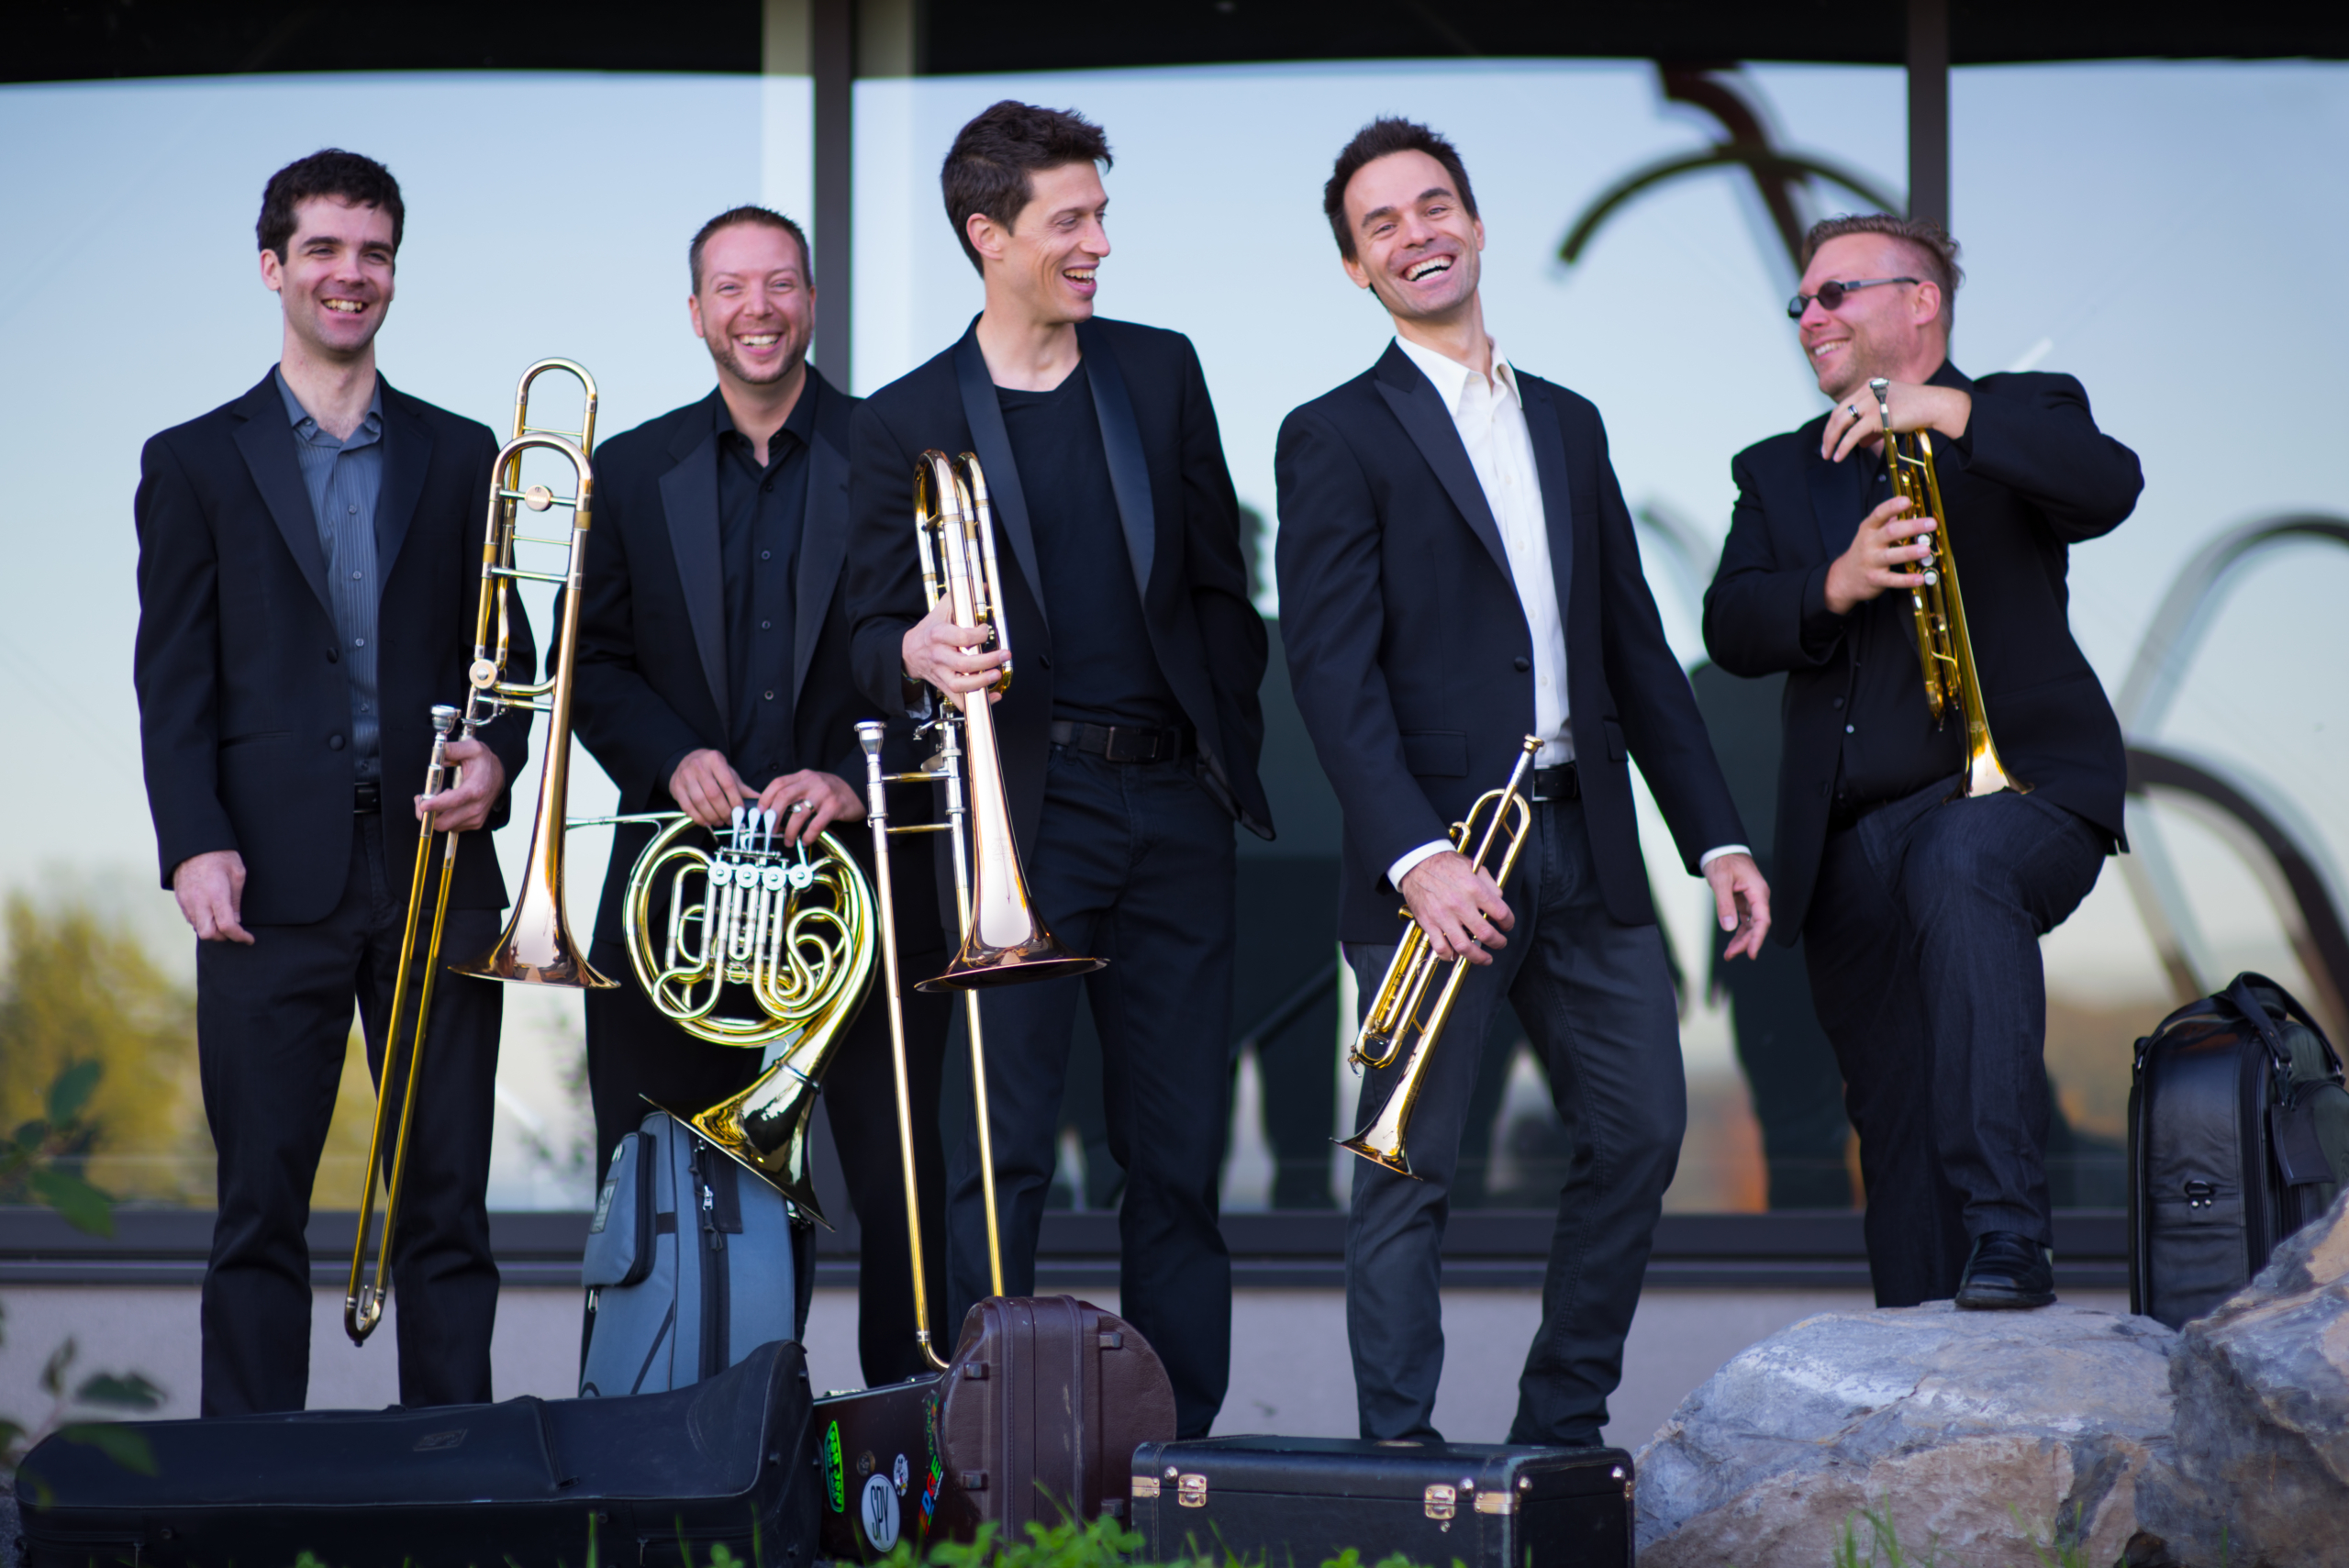 Buzz Brass quintent comes to Steinbach to perform at the Grace Mennonite Church